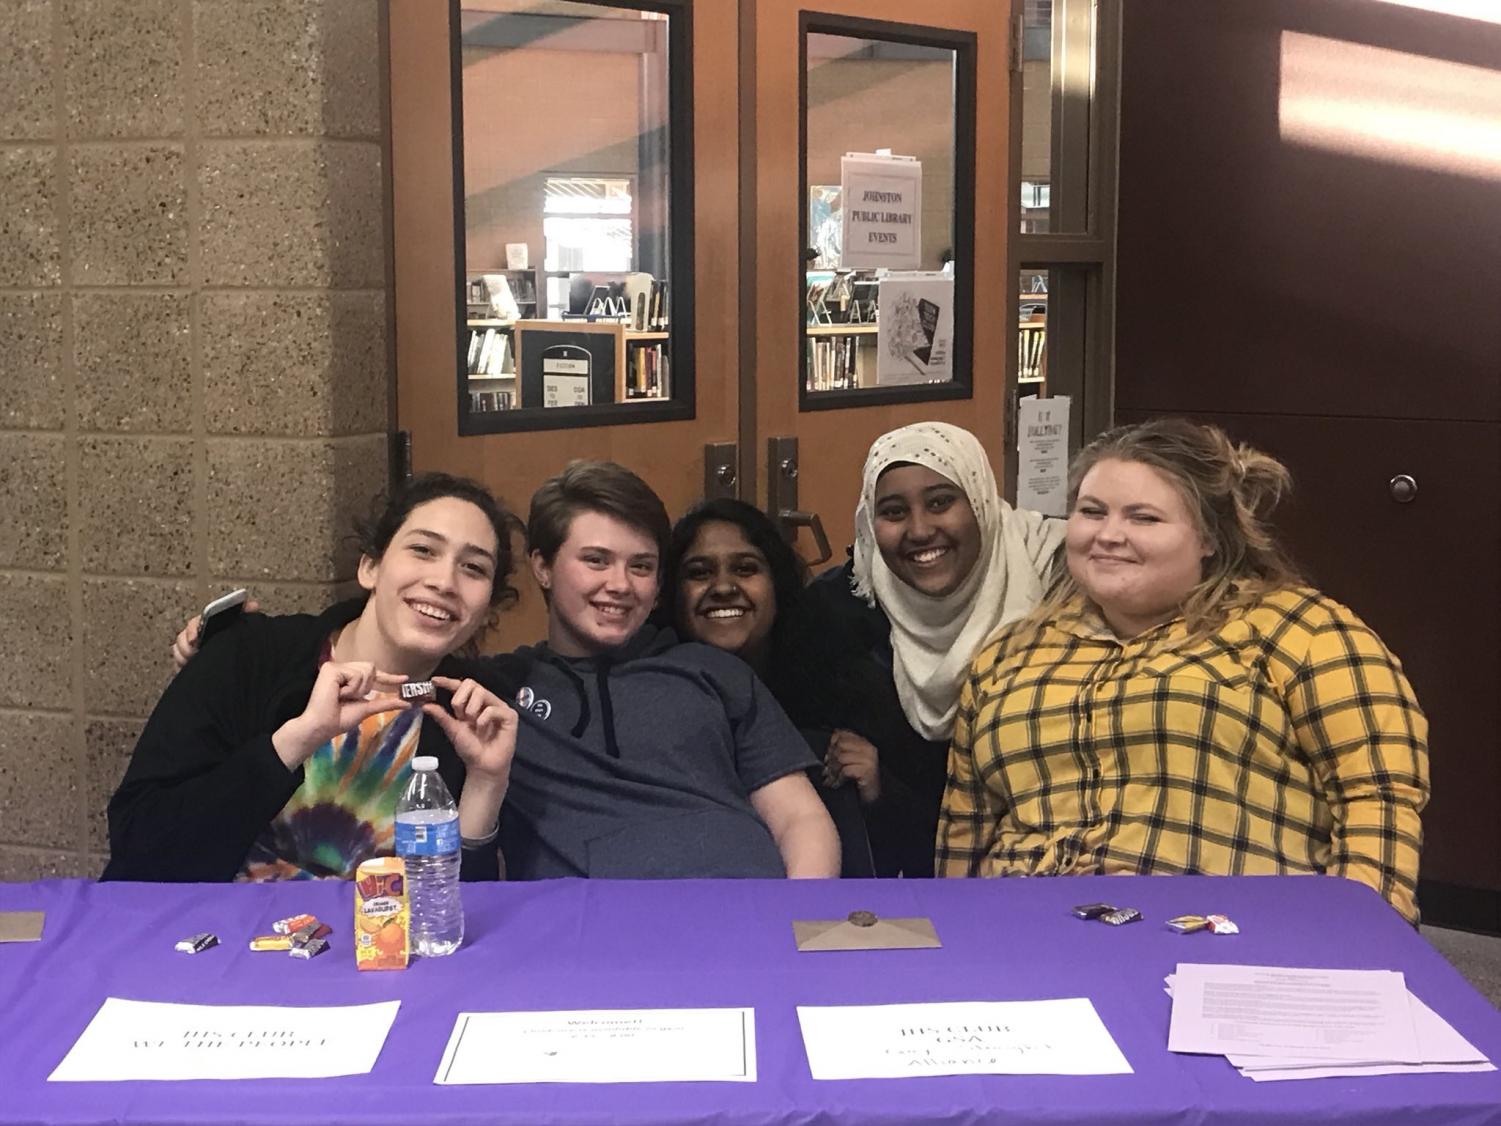 Grace Ballesteros 19, Elliot Fisher 19, Parul Srivastava 19, Obsee Abbajabal 19, Hannah Mitchell 18 set up the G.S.A., C.O.R.E. and We The People tables at the resource fair. (C.O.R.E.) is a great way to connect with new people and actively participate in your school. Srivastava said.